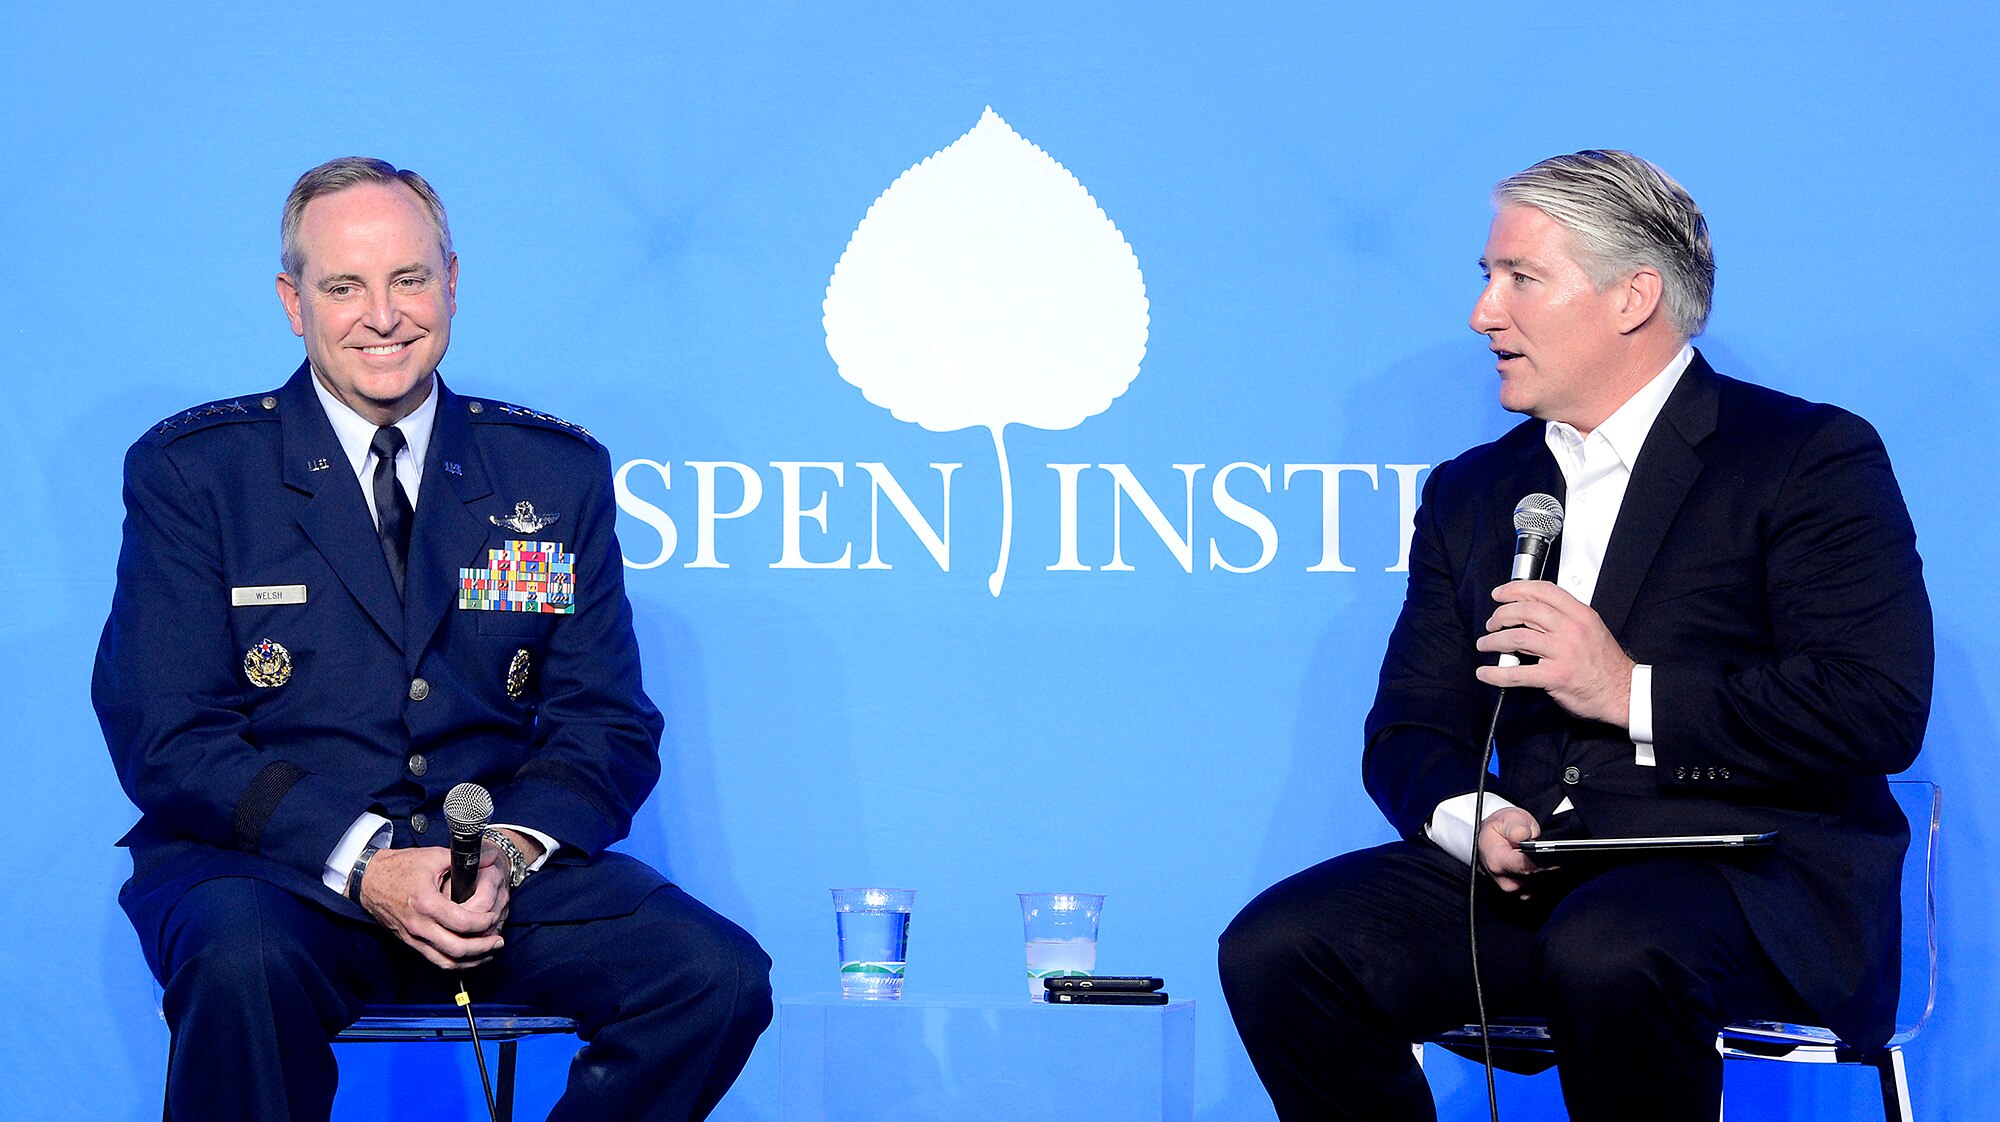 John King, CNN National Correspondent, asks Air Force Chief of Staff Gen. Mark A. Welsh III a question during the Aspen Security Forum in Aspen, Colo., July 17, 2013. Welsh opened up the four-day event with a session focusing on the importance of airpower for the nation. King moderated the session and touched upon other topics impacting today's Air Force, the Department of Defense and national security. (U.S. Air Force photo/Scott M. Ash)